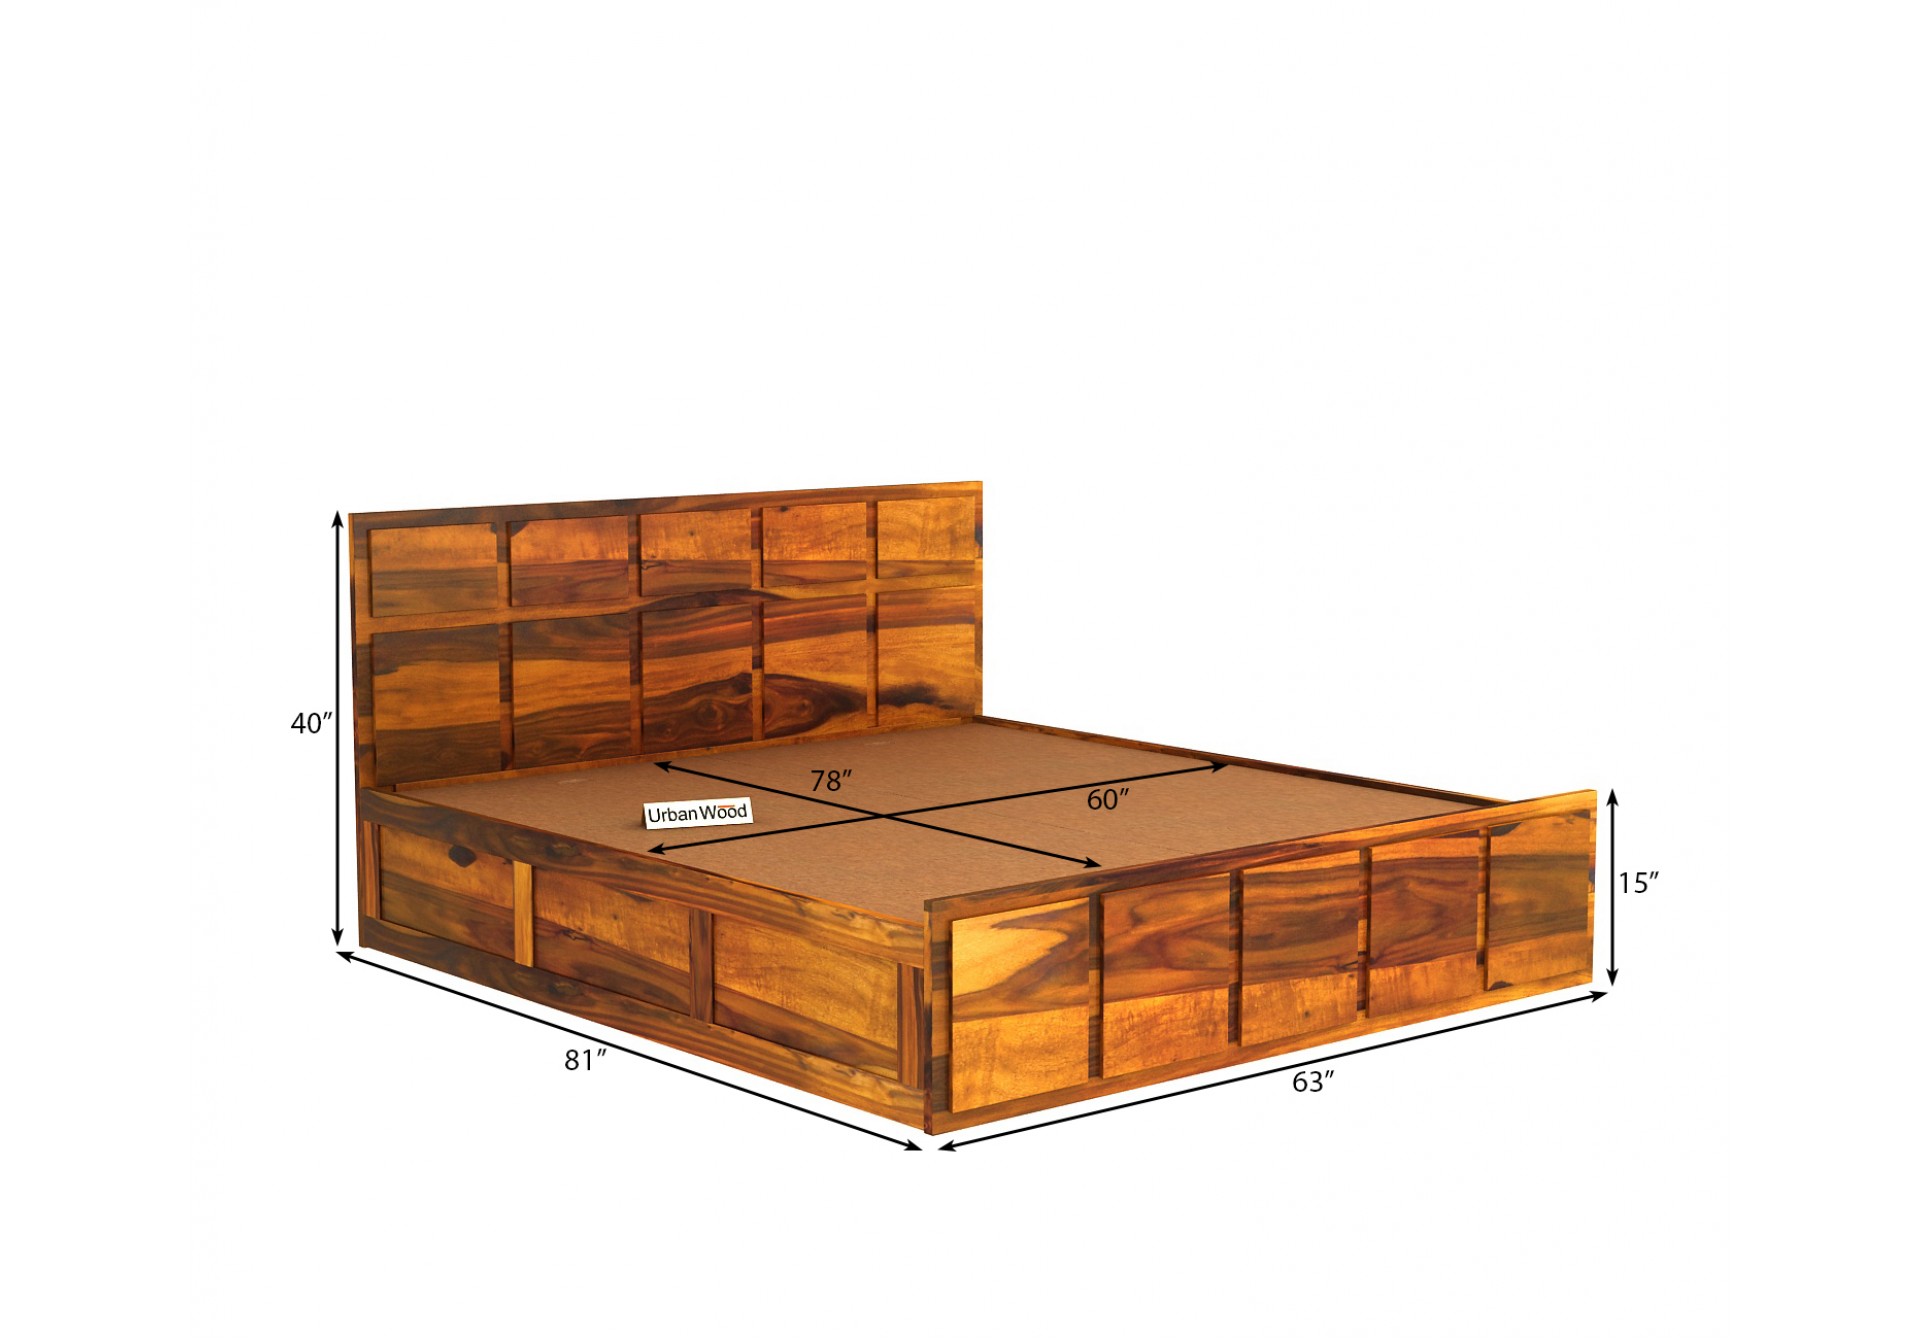 Bedswind Bed With Storage ( Queen Size, Honey Finish )